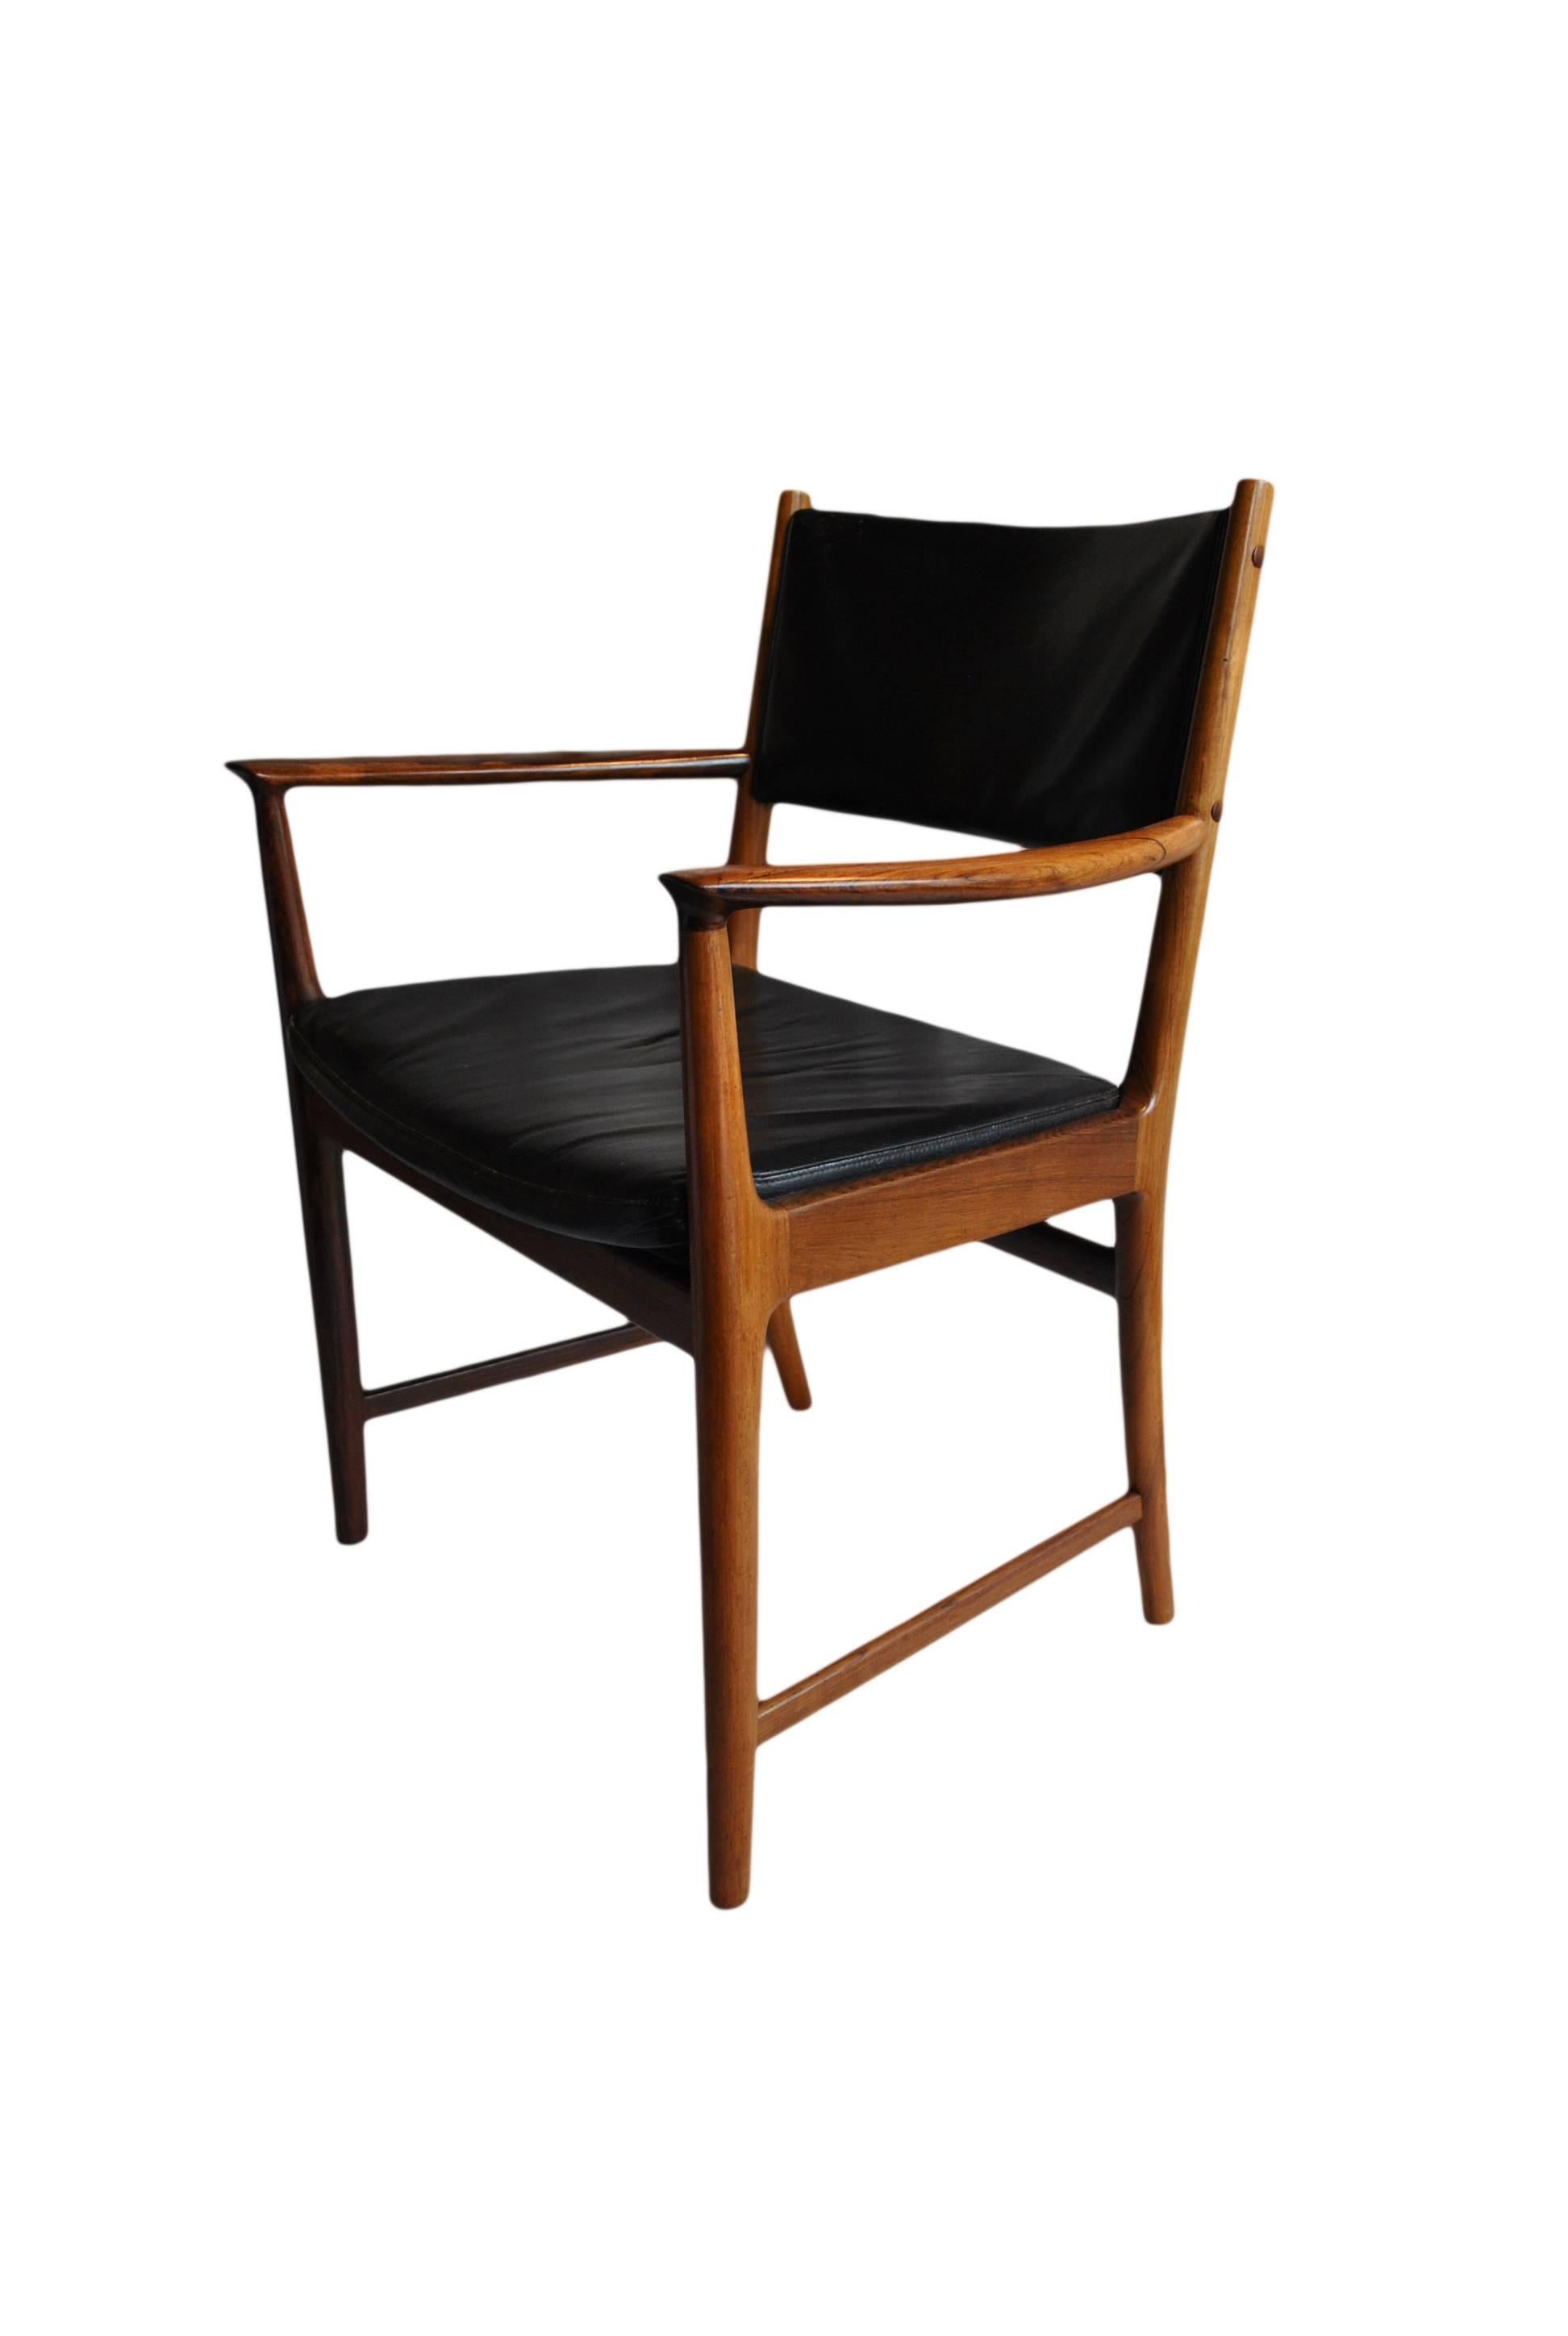 A wonderful example of this rare Kai Lyngfelt Larsen chair. Superb rosewood and original (we can reupholster in any colour if required) leather upholstery. Produced by Soren Willadsen, Denmark, circa 1960.
           